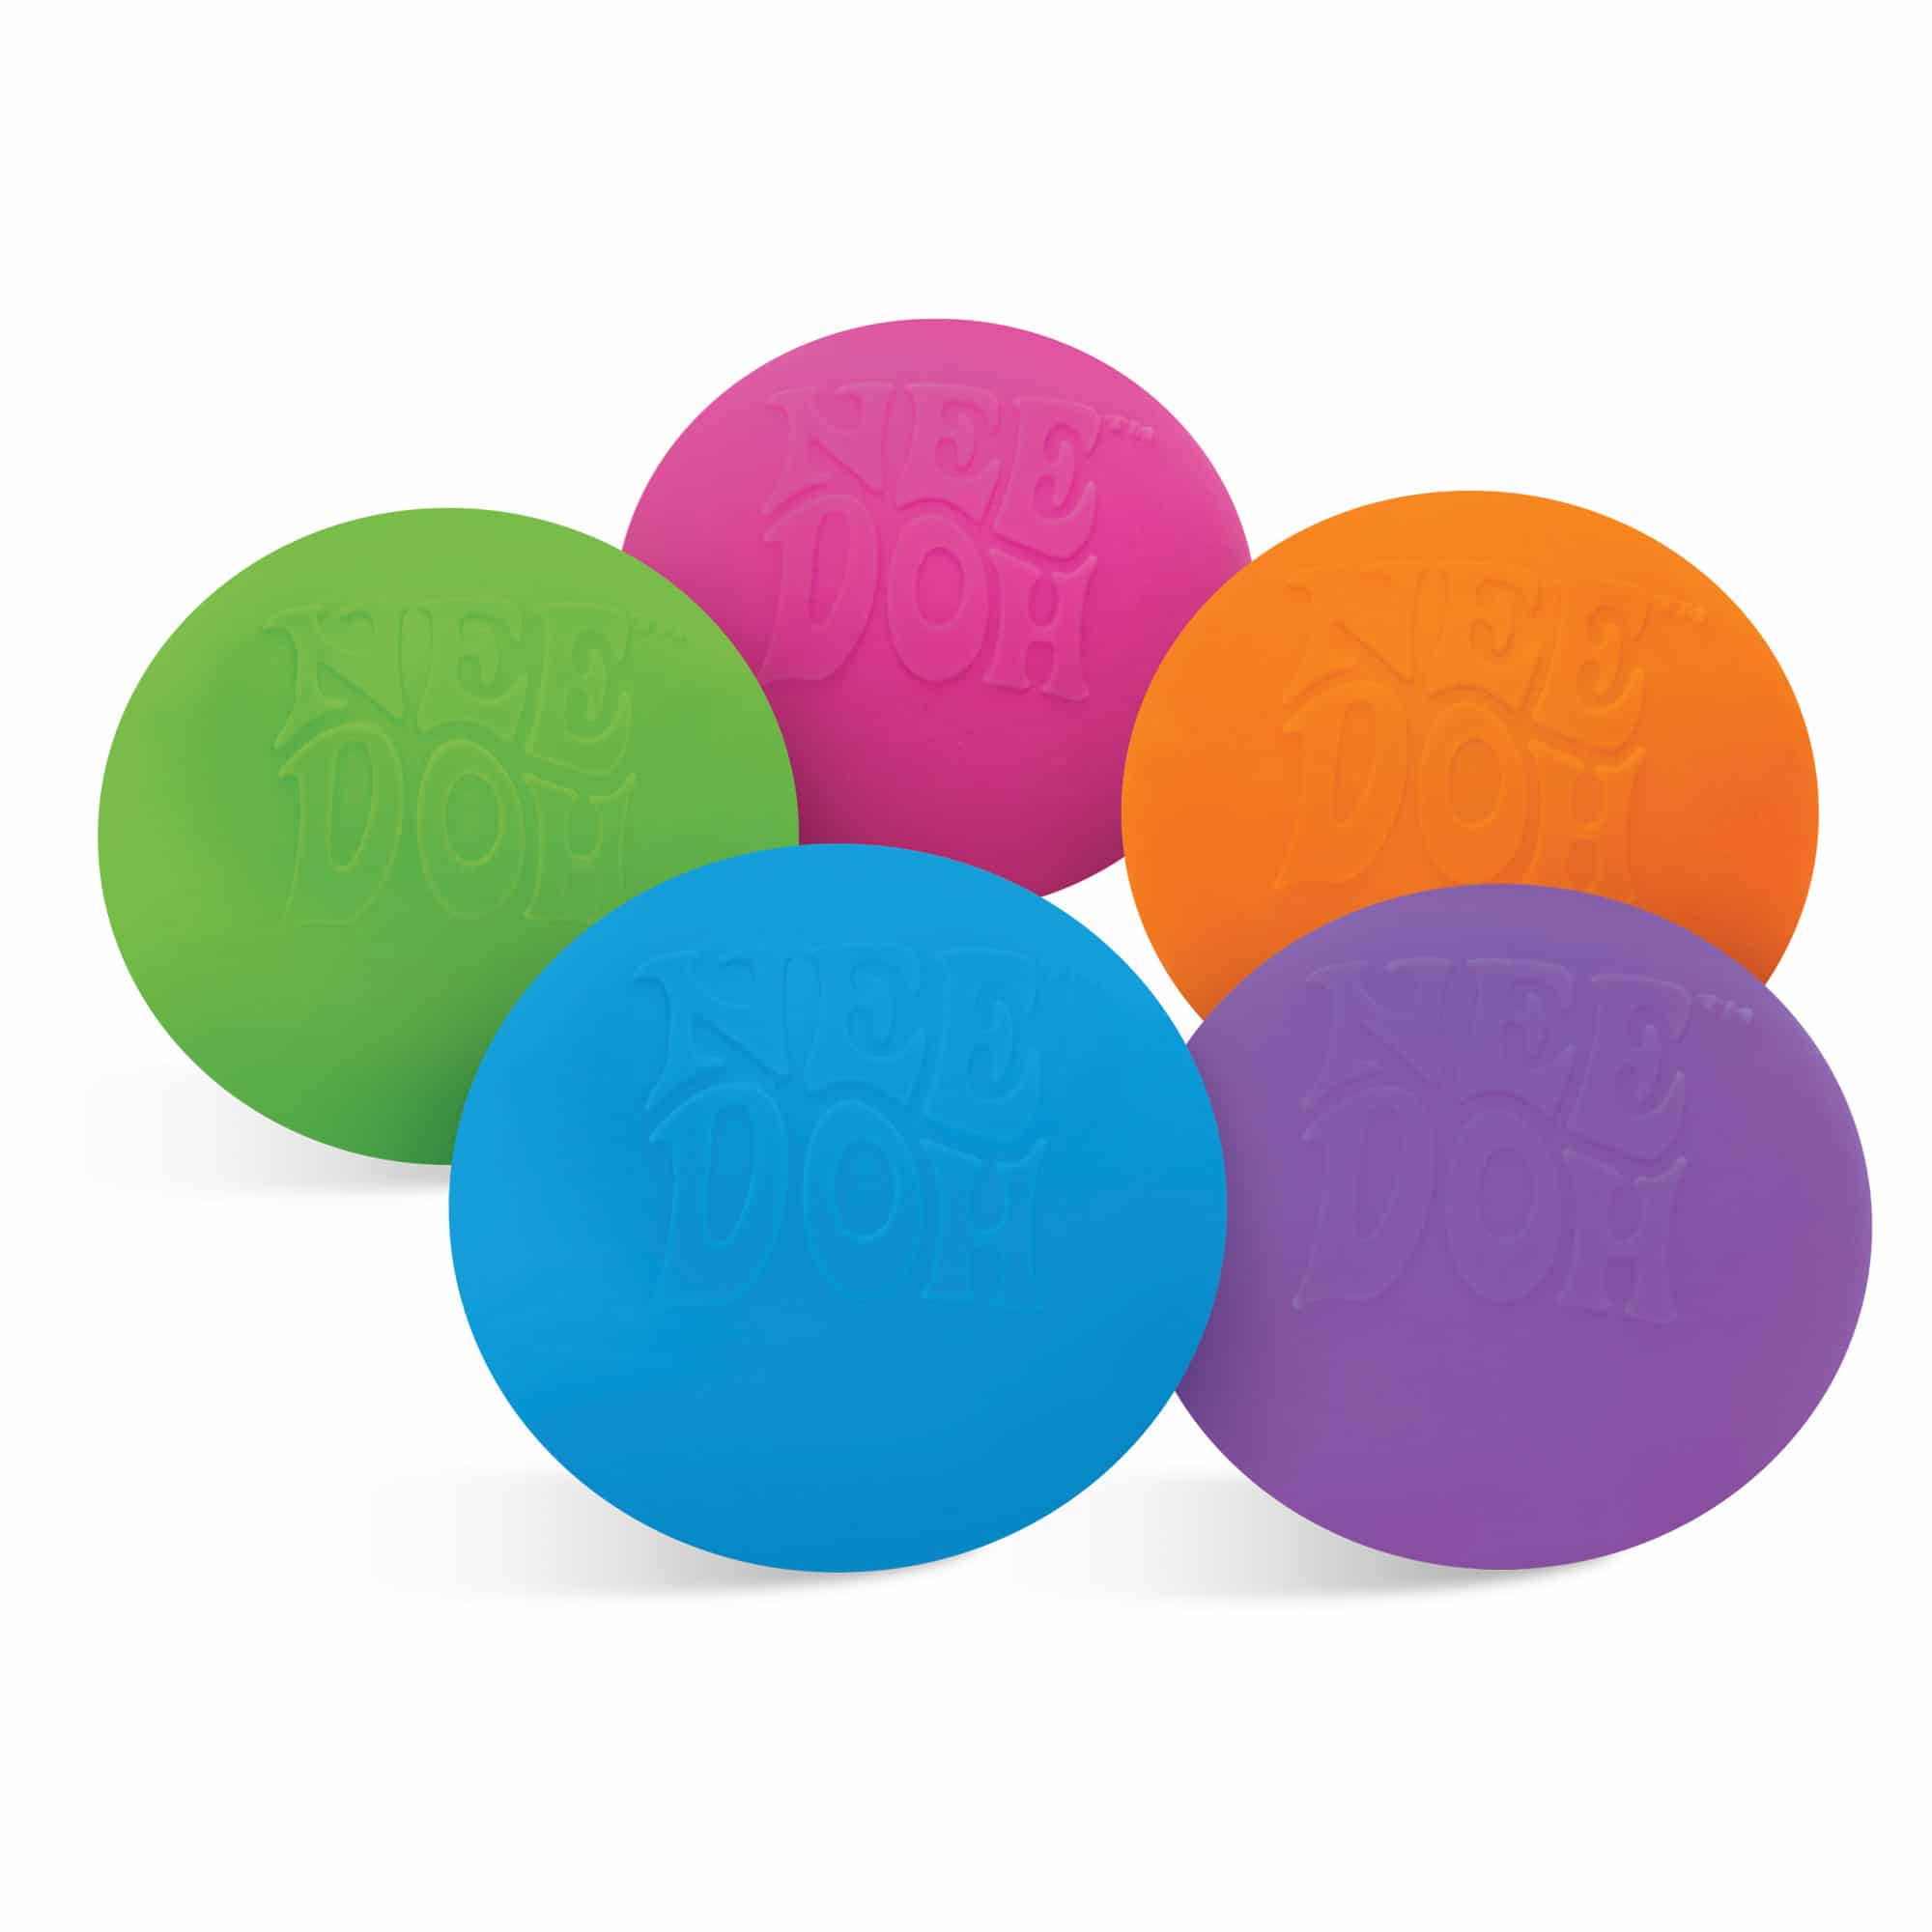 All five colors of the Nee Doh balls are sitting in a circle.